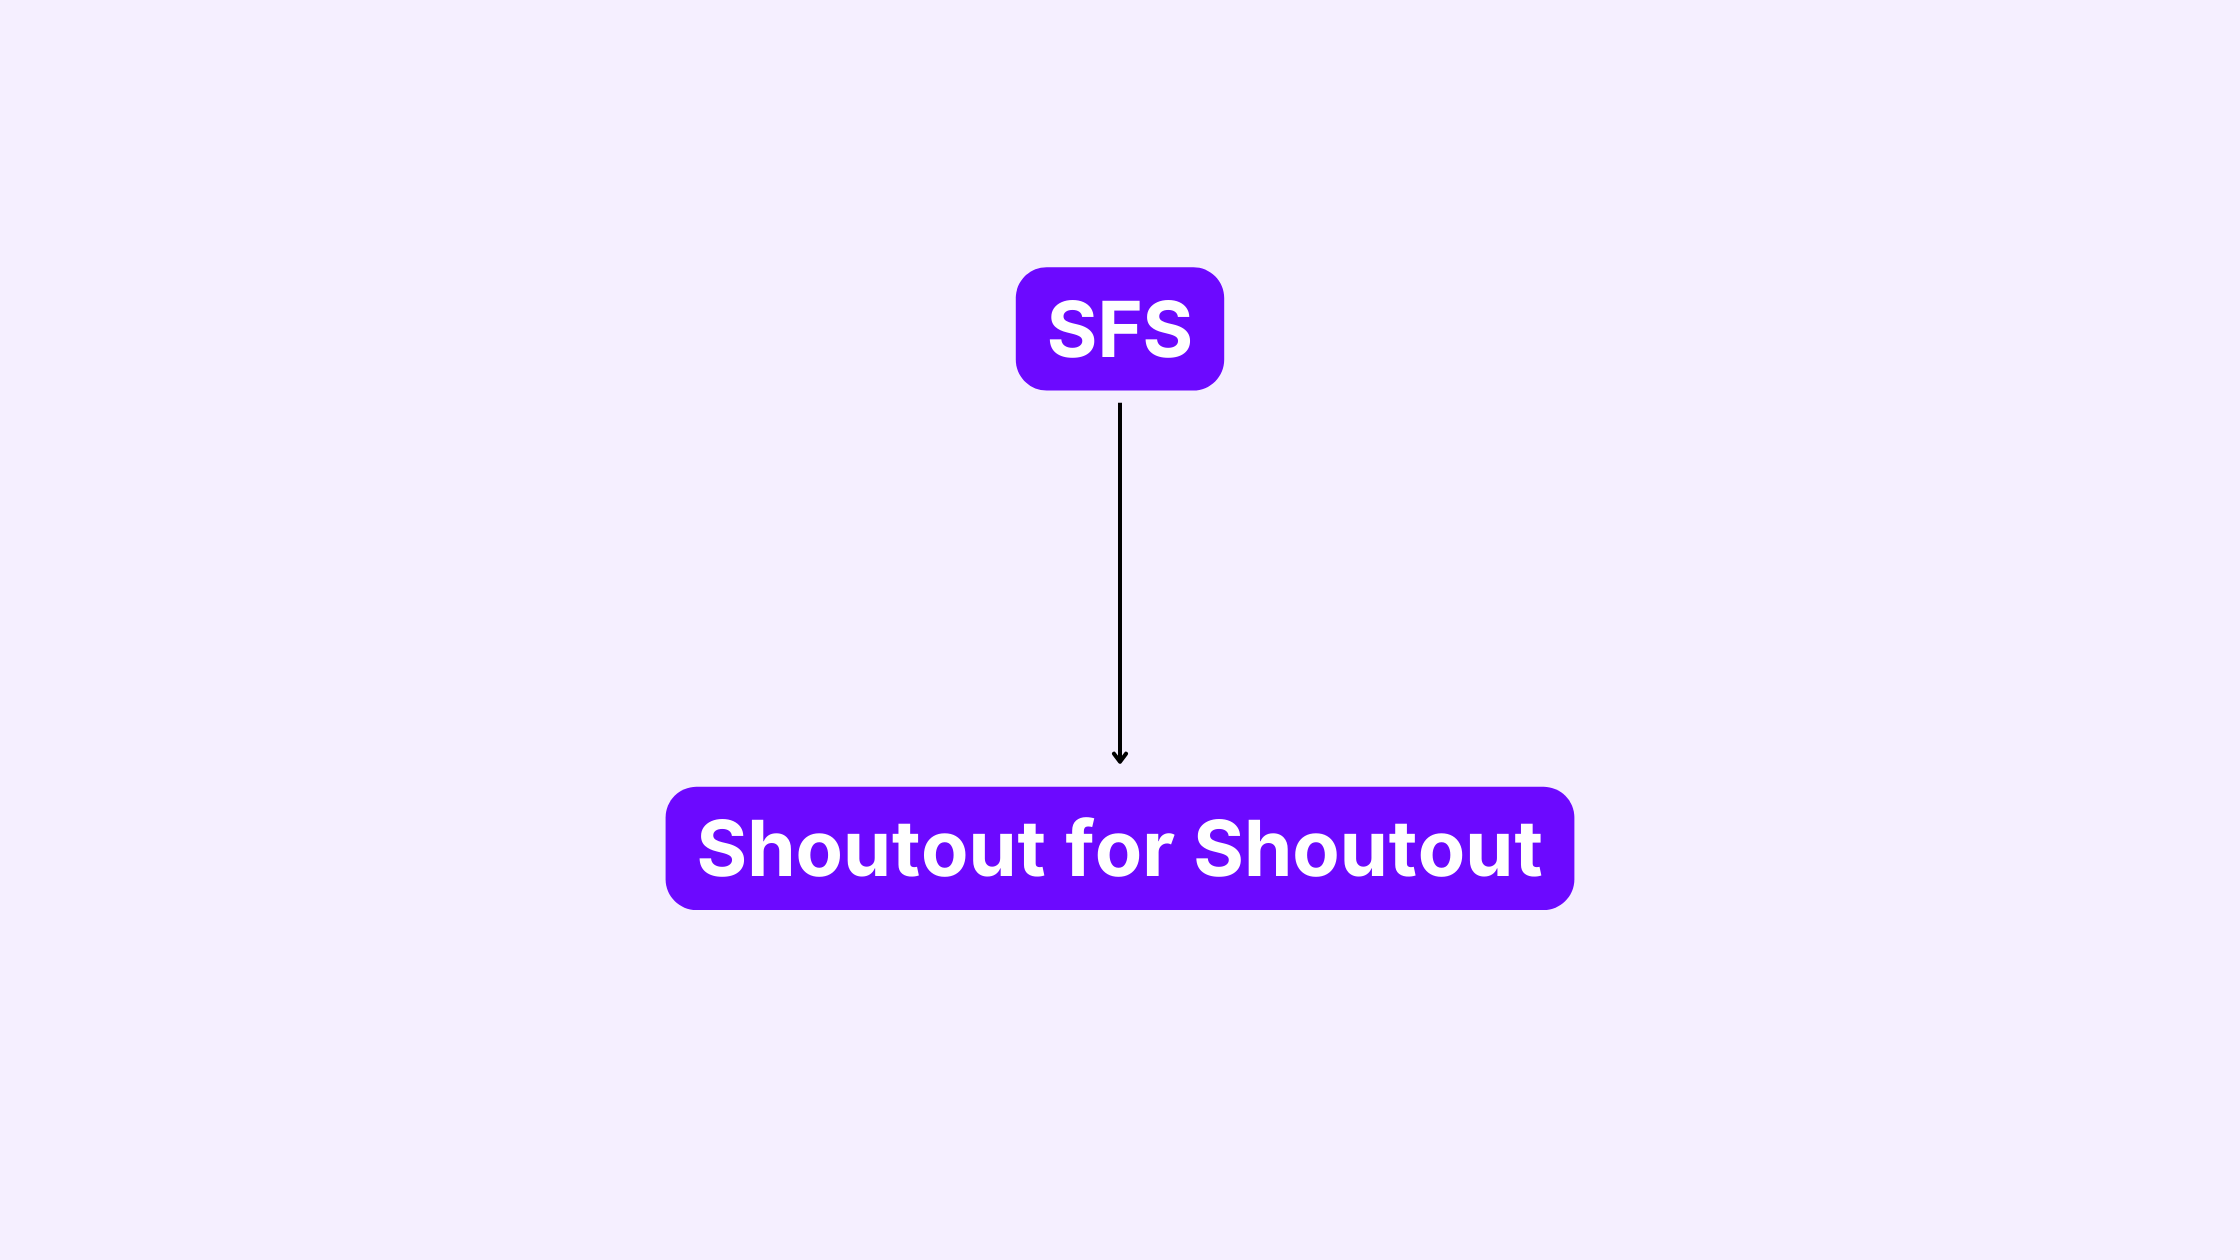 What does SFS mean on Instagram